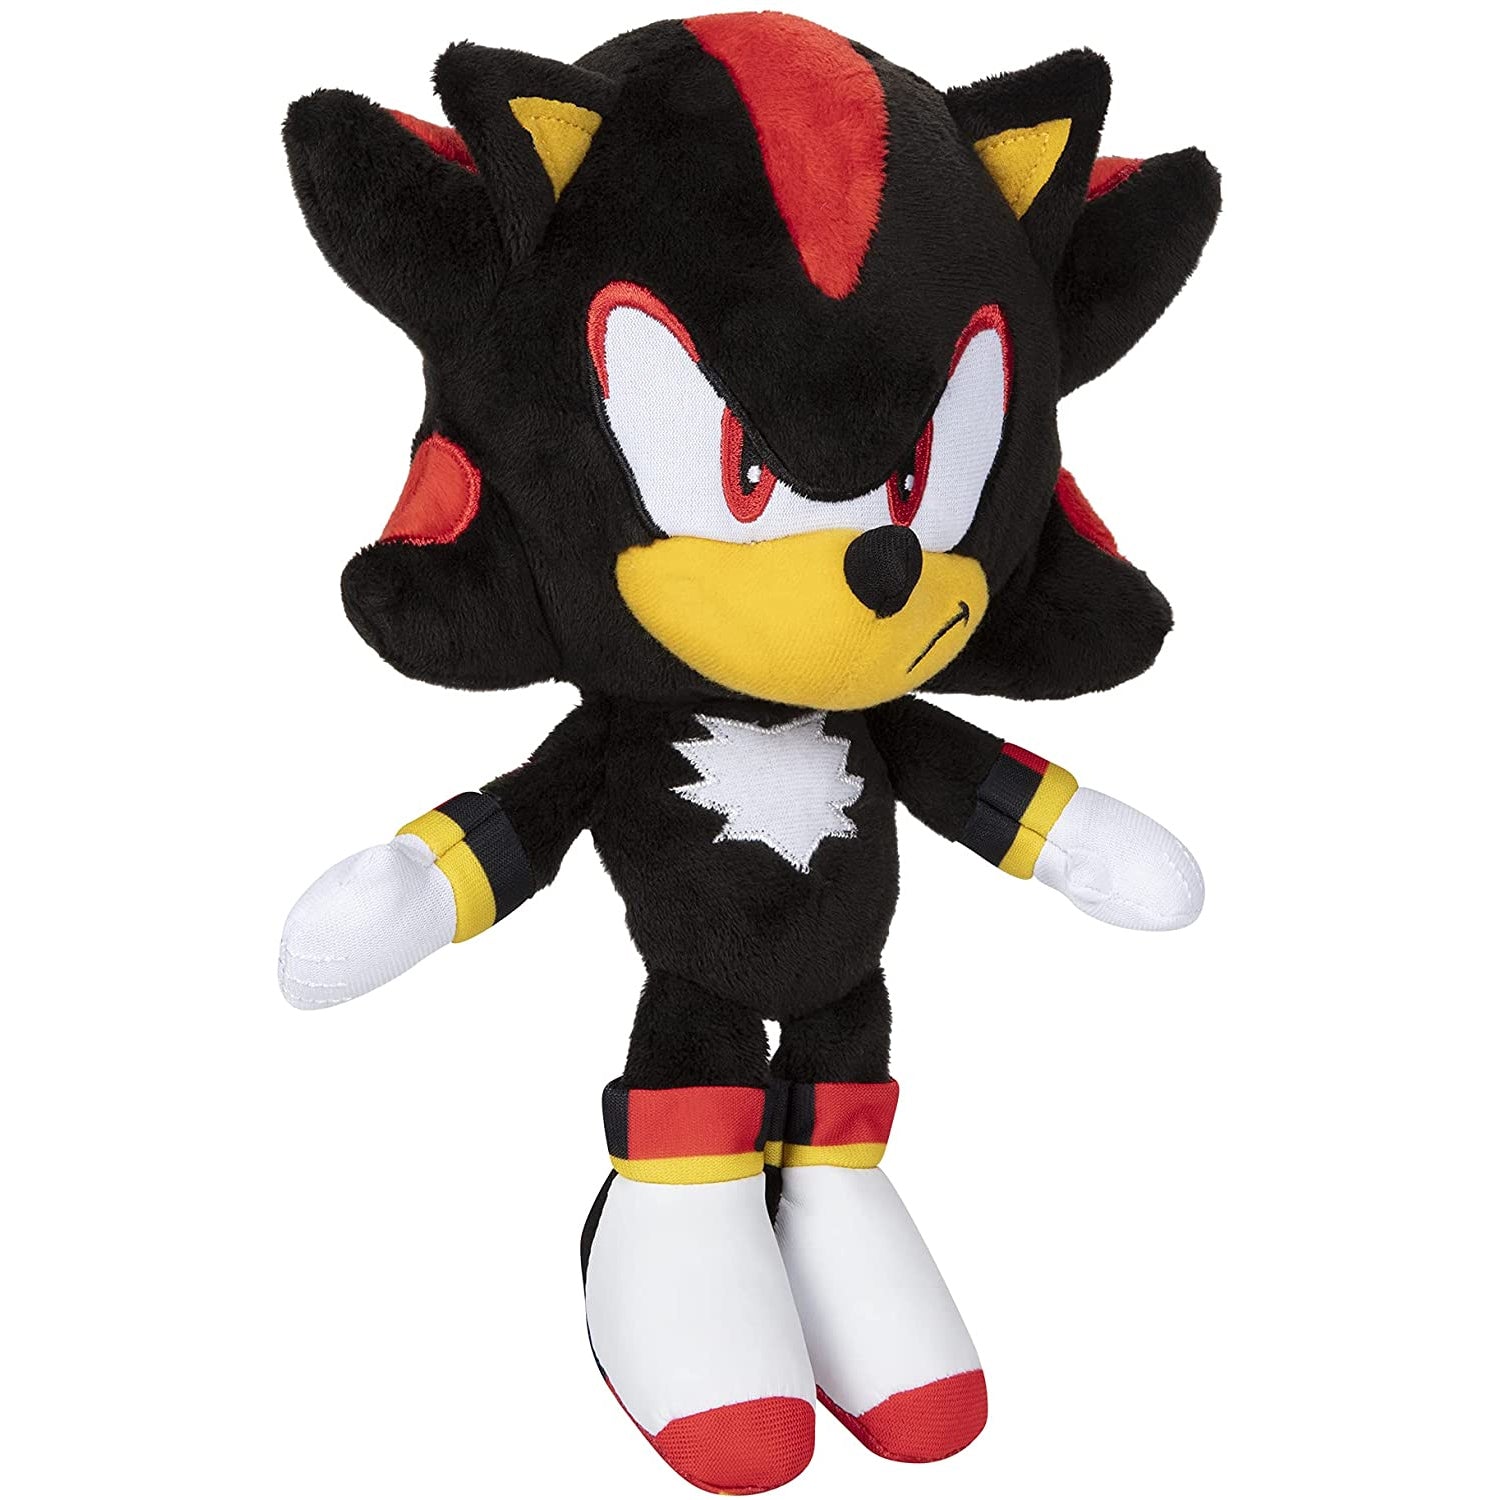 Sonic The Hedgehog Plush 8-Inch Collectible Toy